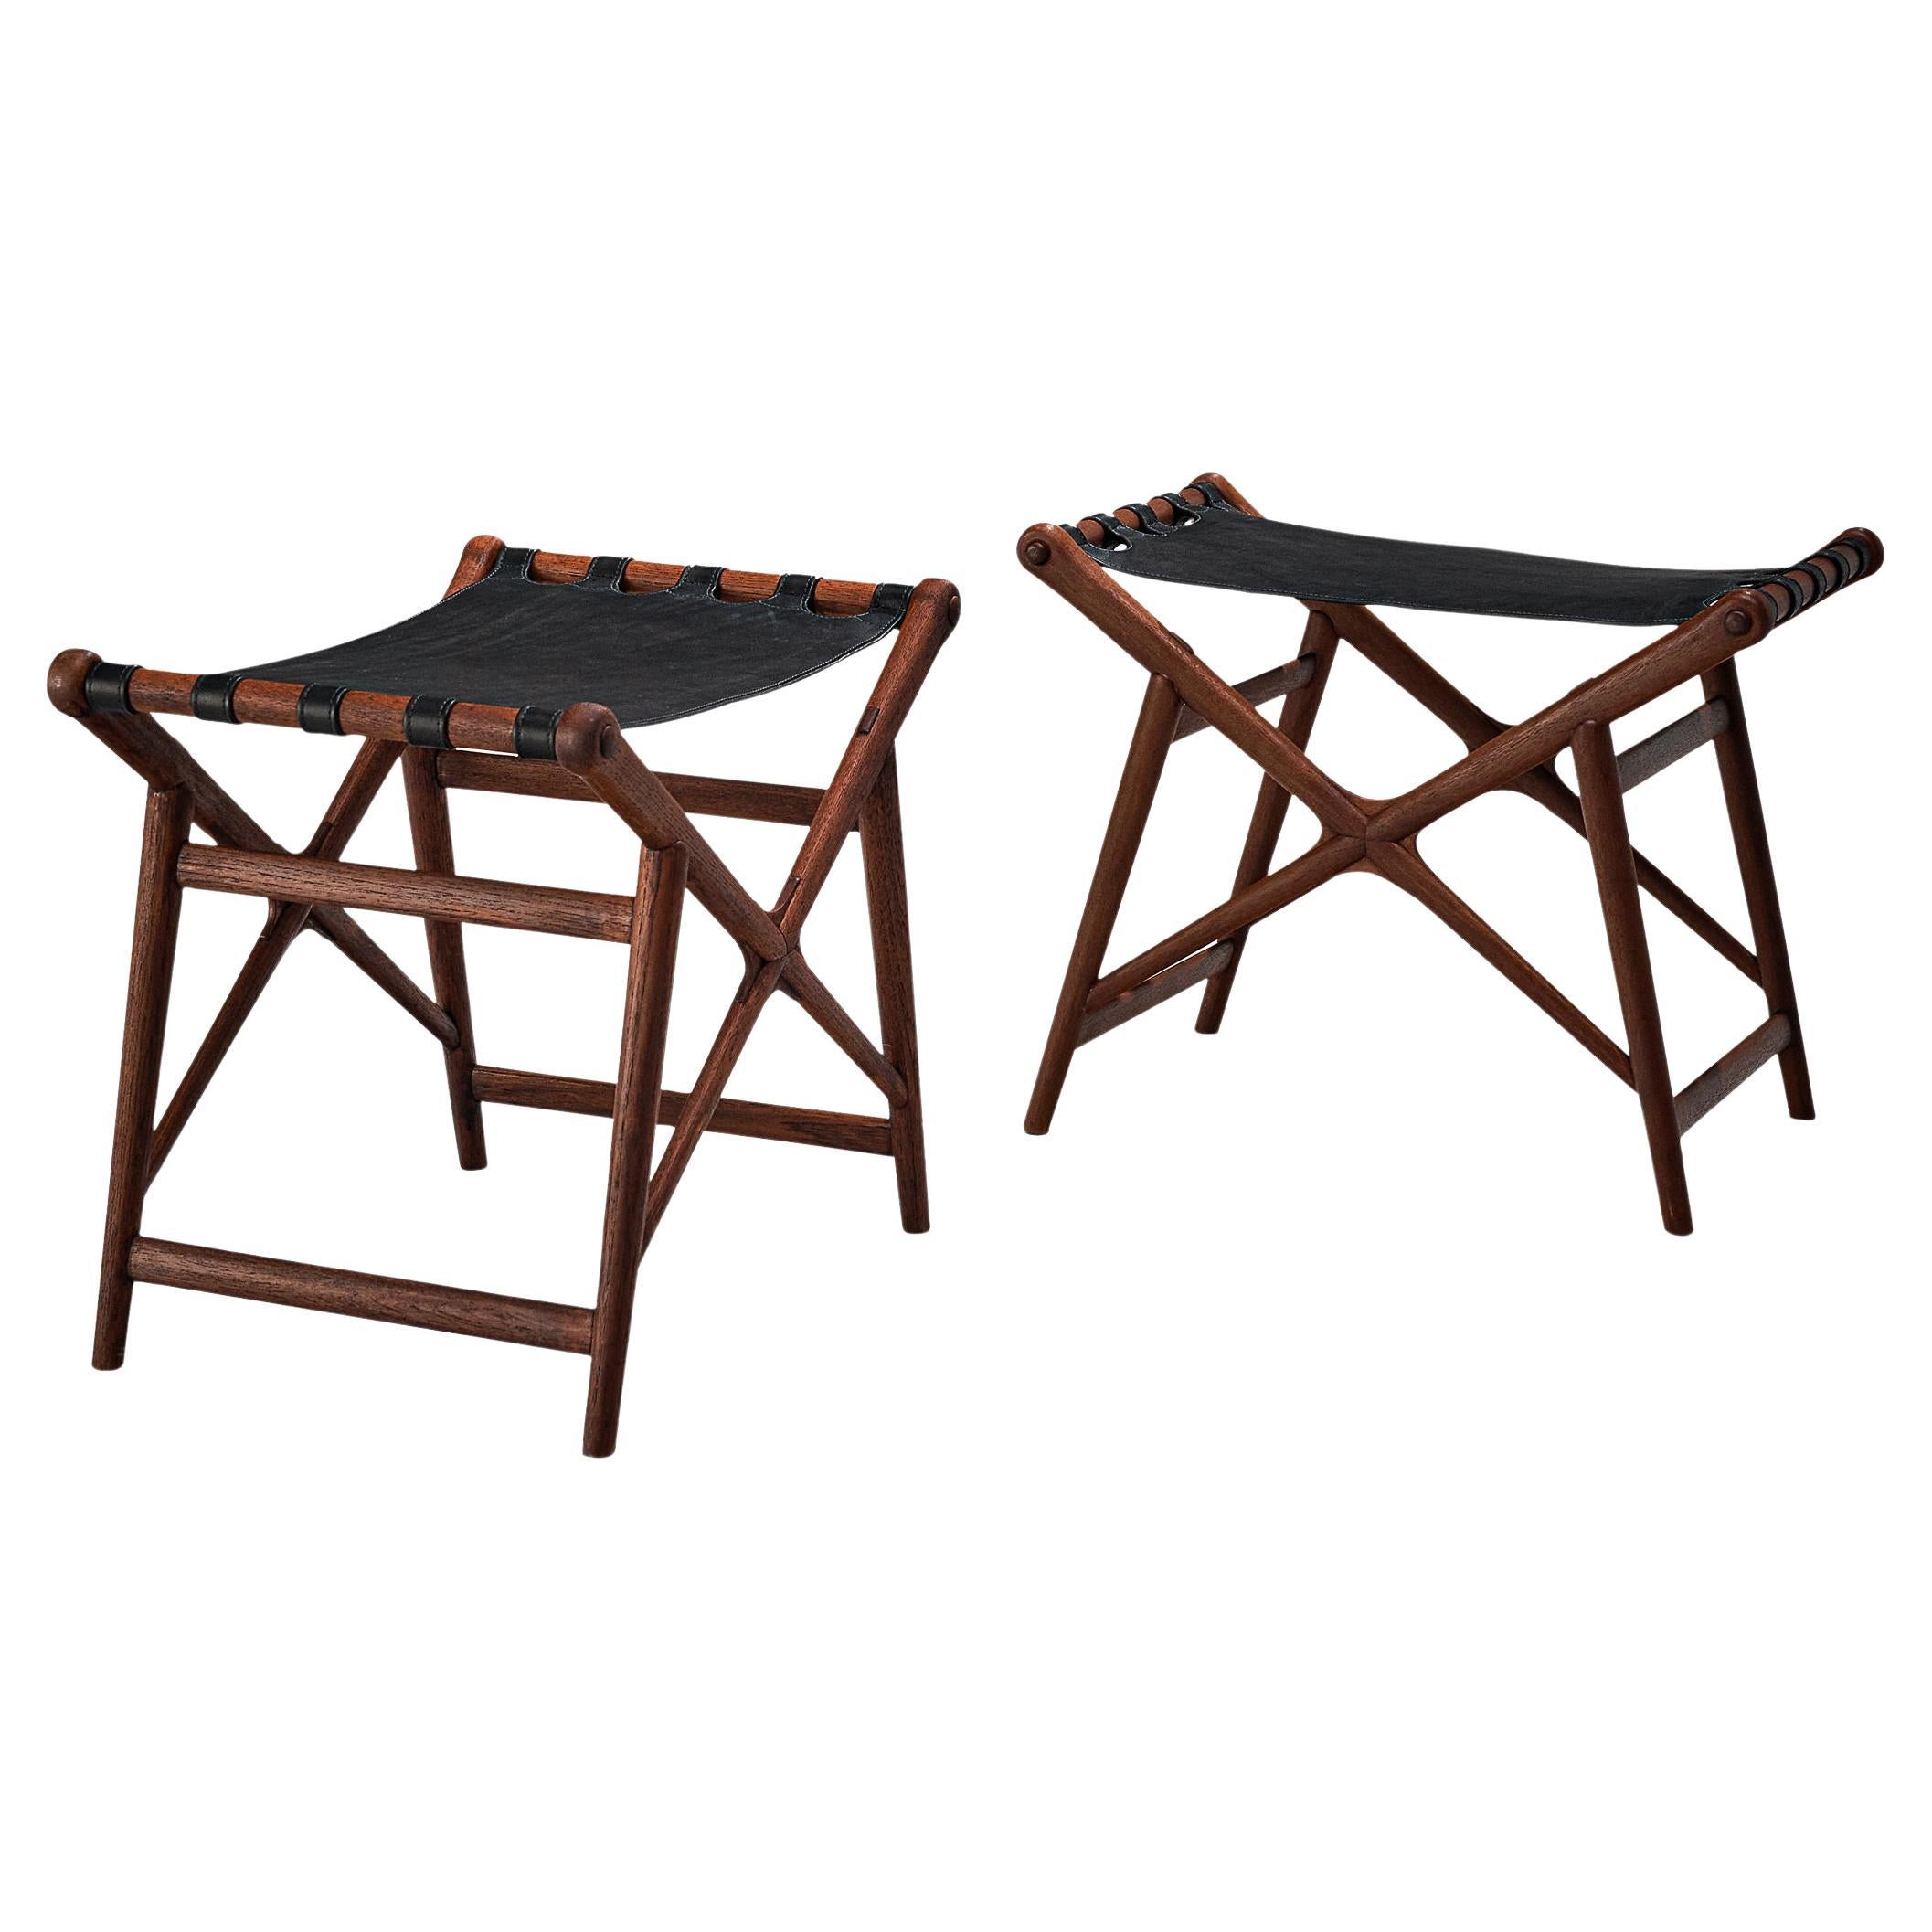 Erik Glemme Pair of Stools in Teak and Black Leather